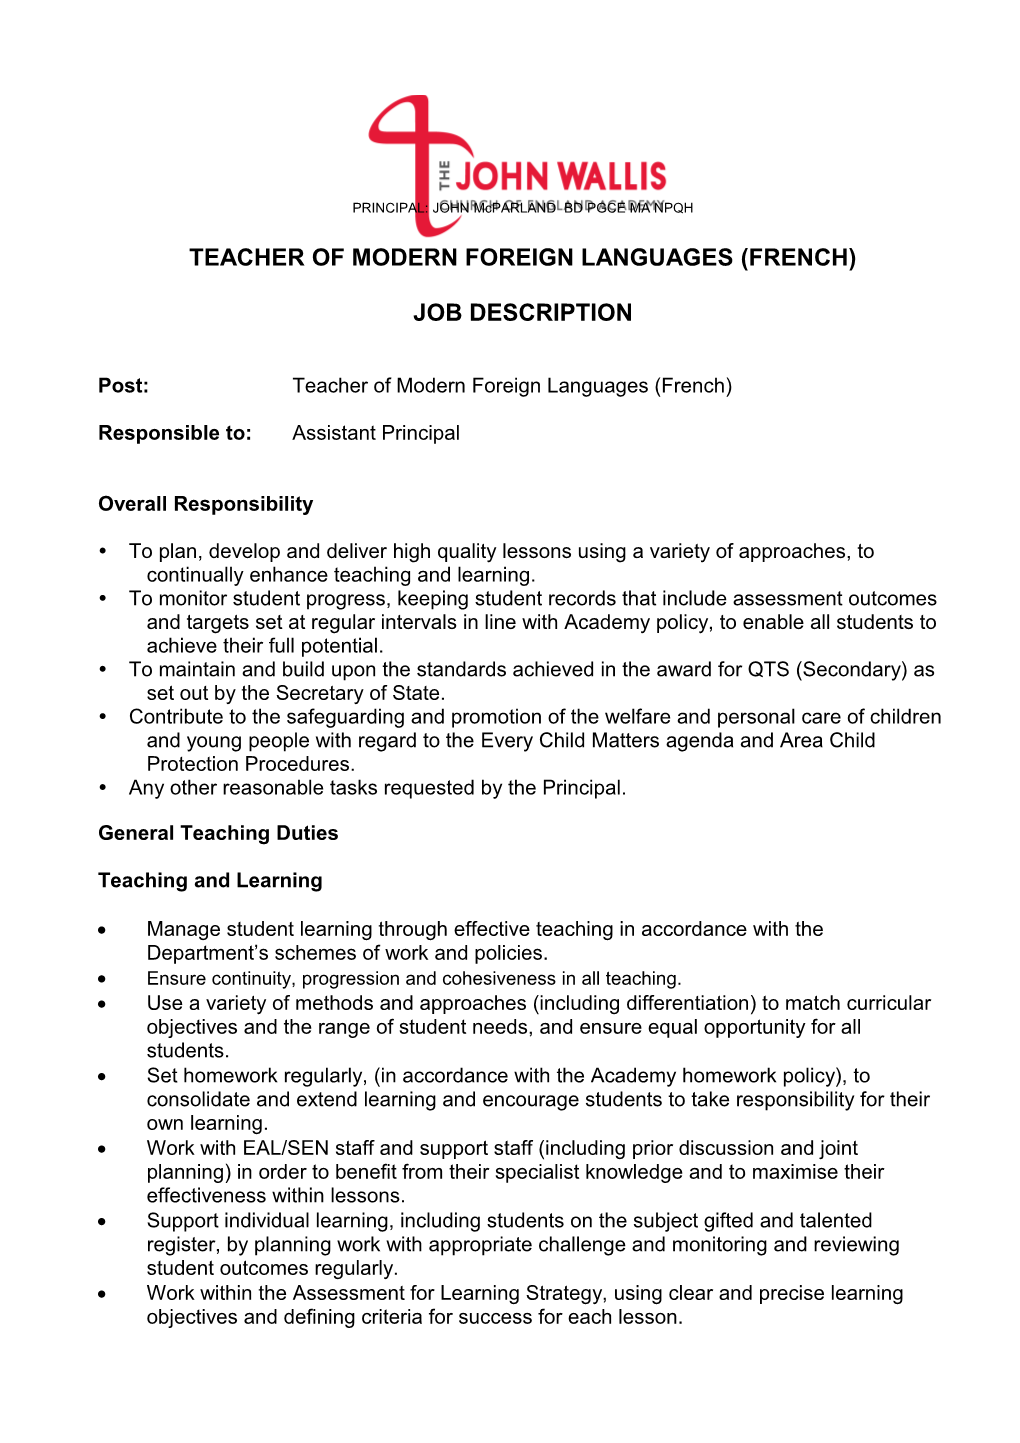 Teacher of Modern Foreign Languages (French)